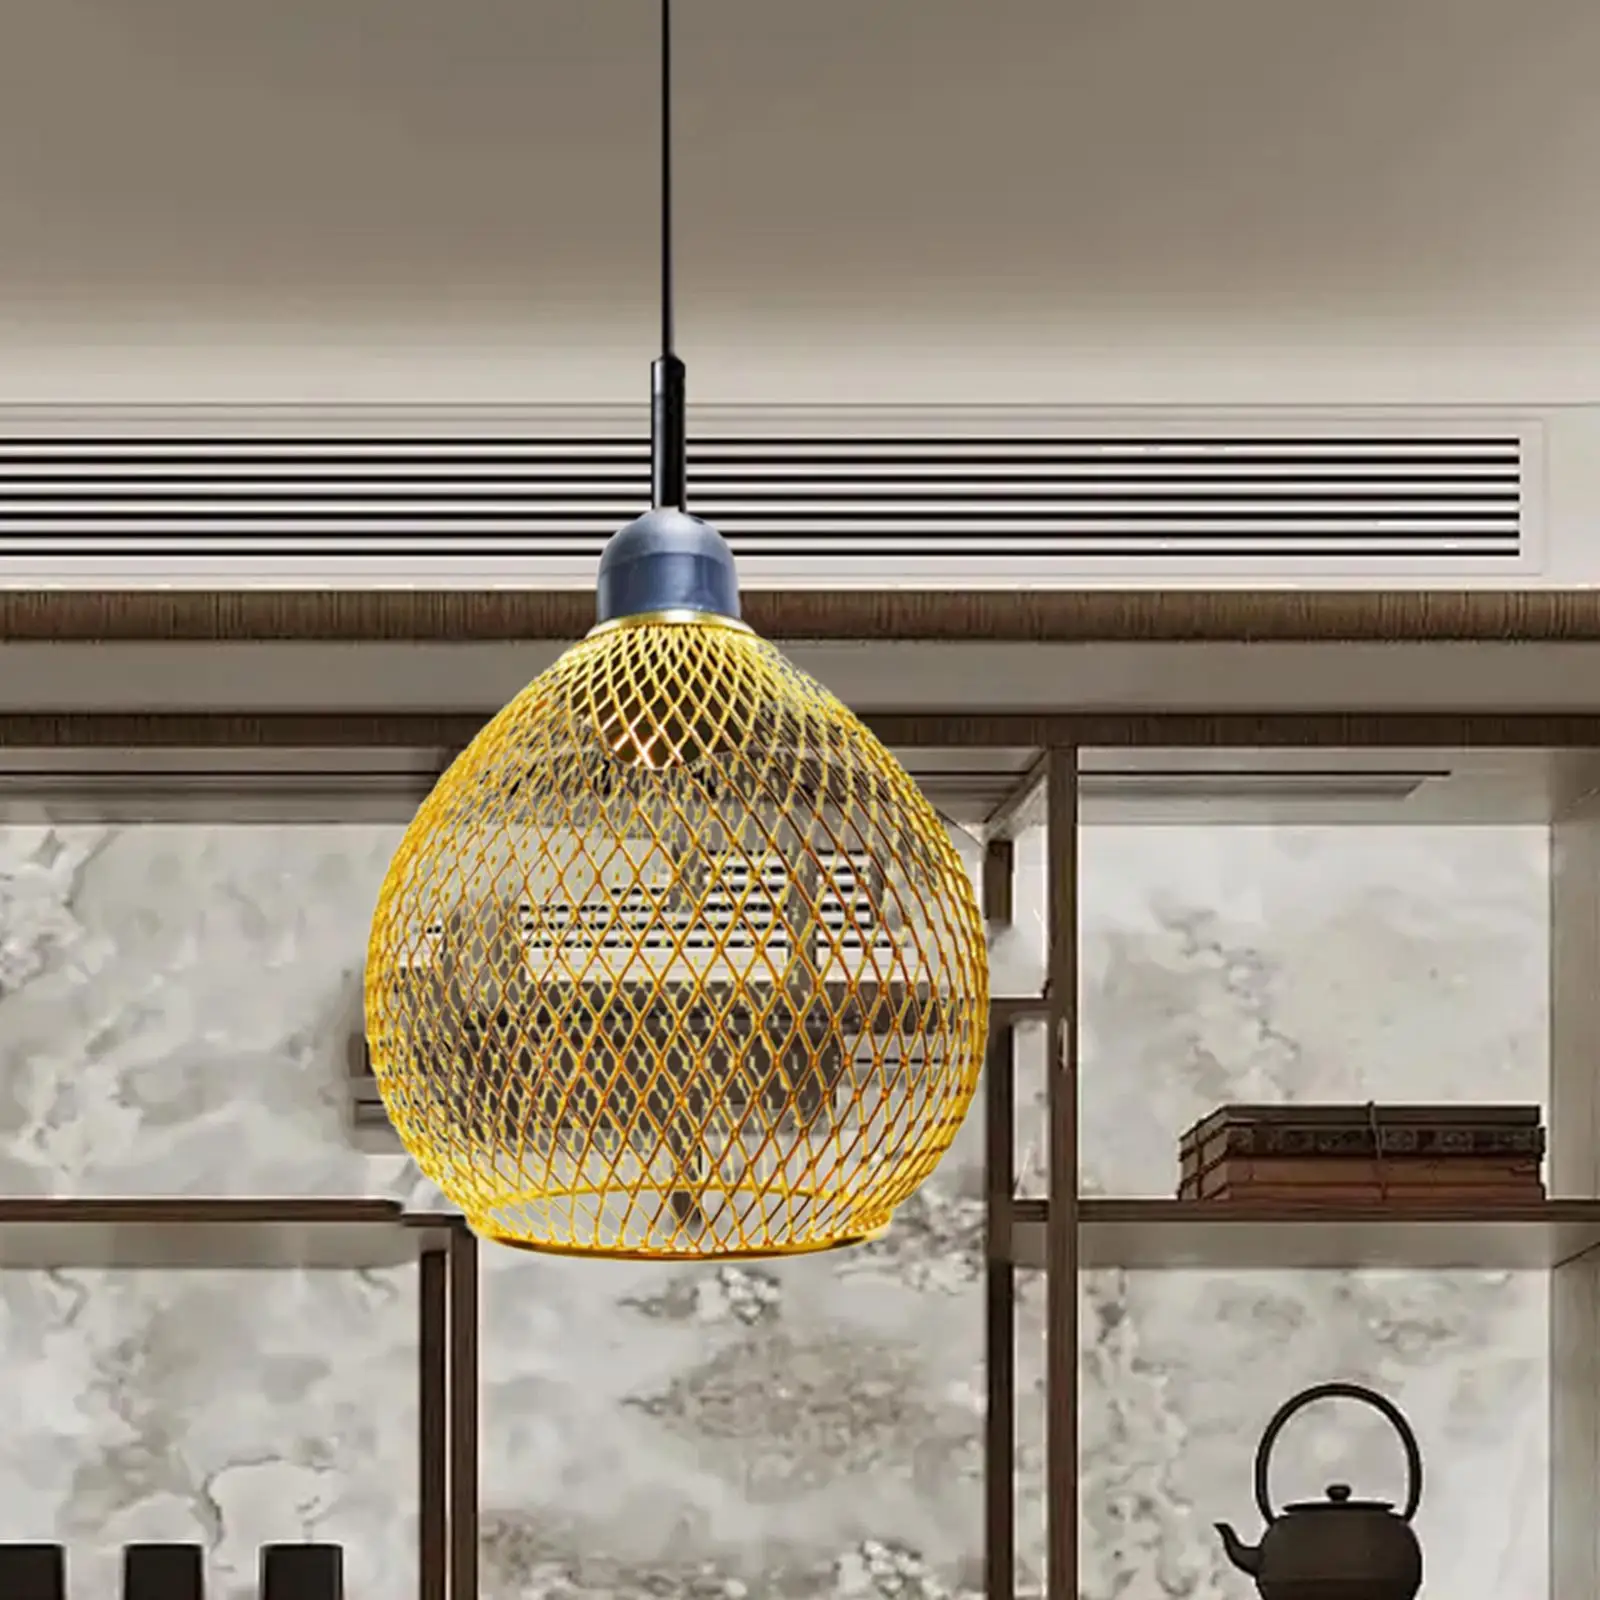 Mesh Pendant Lamp Shade Fixtures Decorative Replacement Iron Wire Lampshade for Dining Room Cafe Kitchen Bedroom Coffee Shop